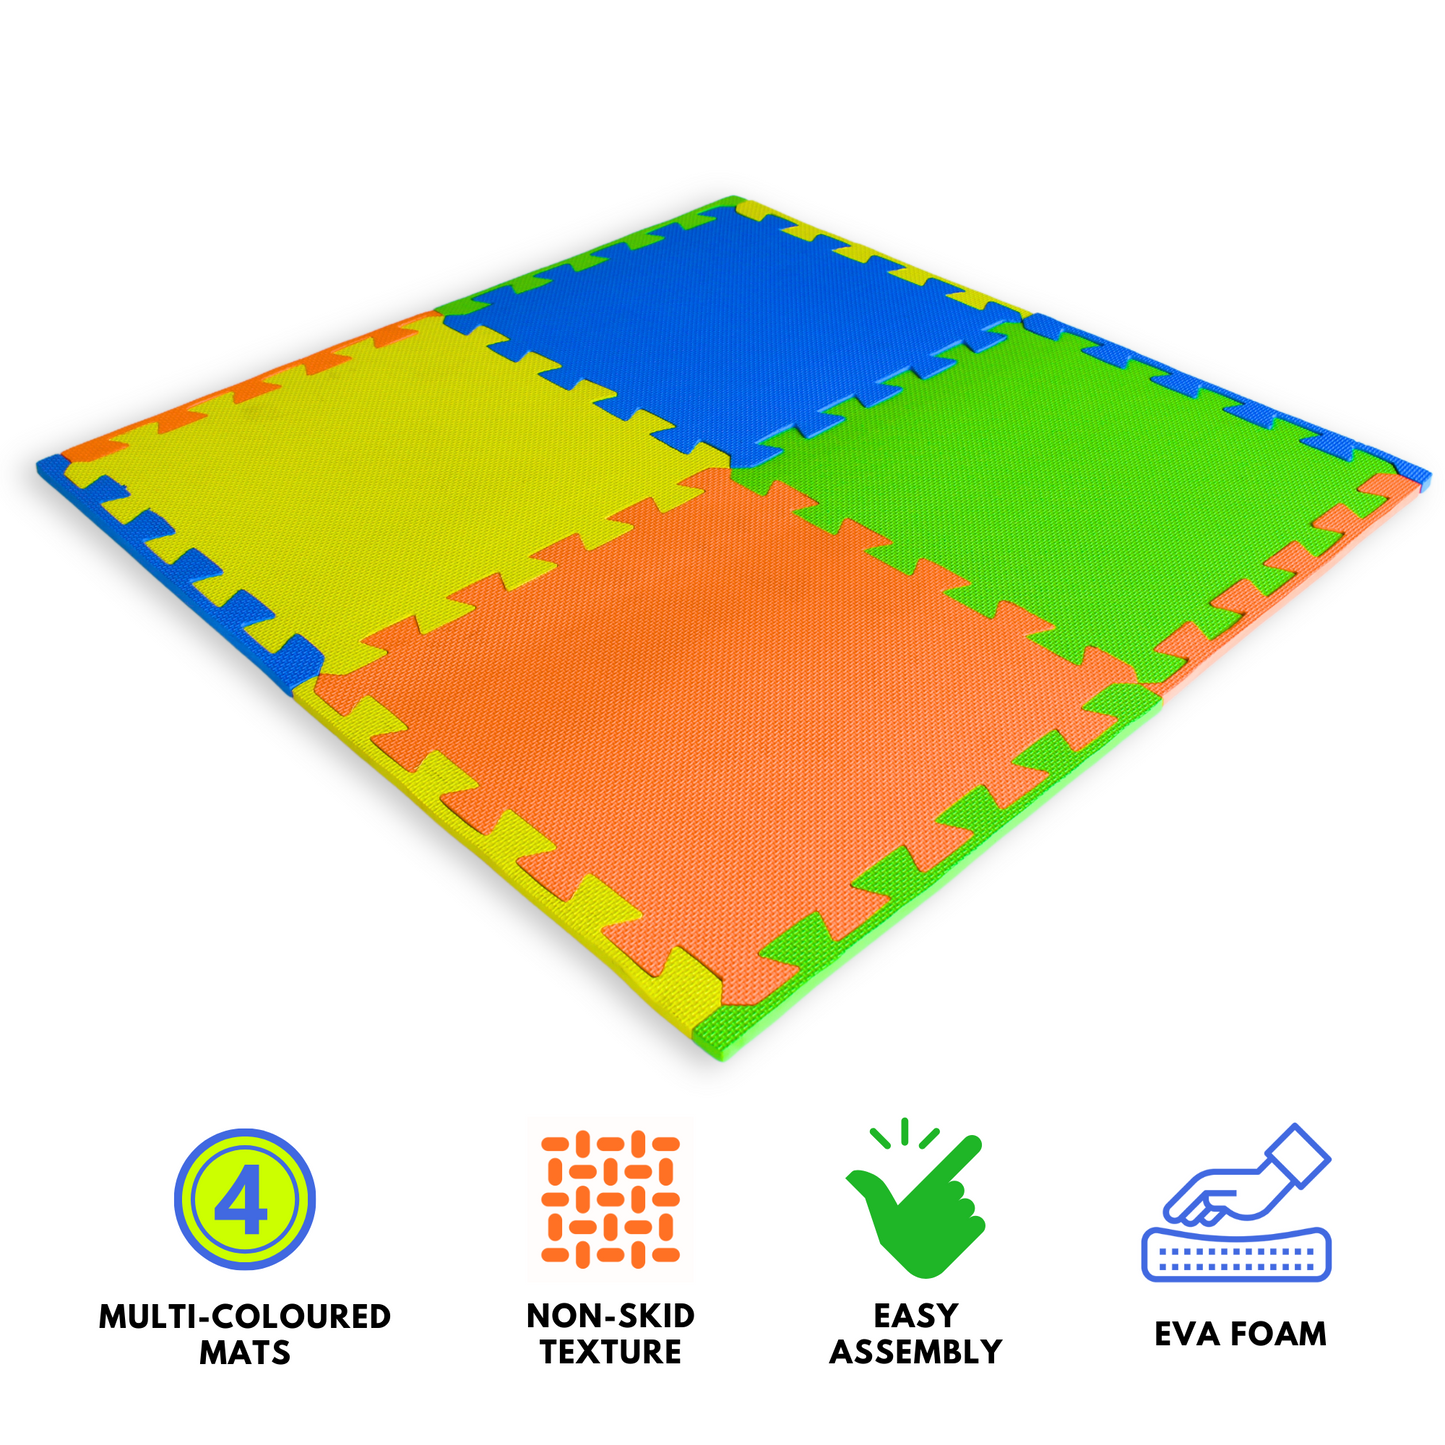 Safe & Soft Fun! Interlocking Play Mats for Crawling, Playing & Learning (Multicolor, Pack of 4)